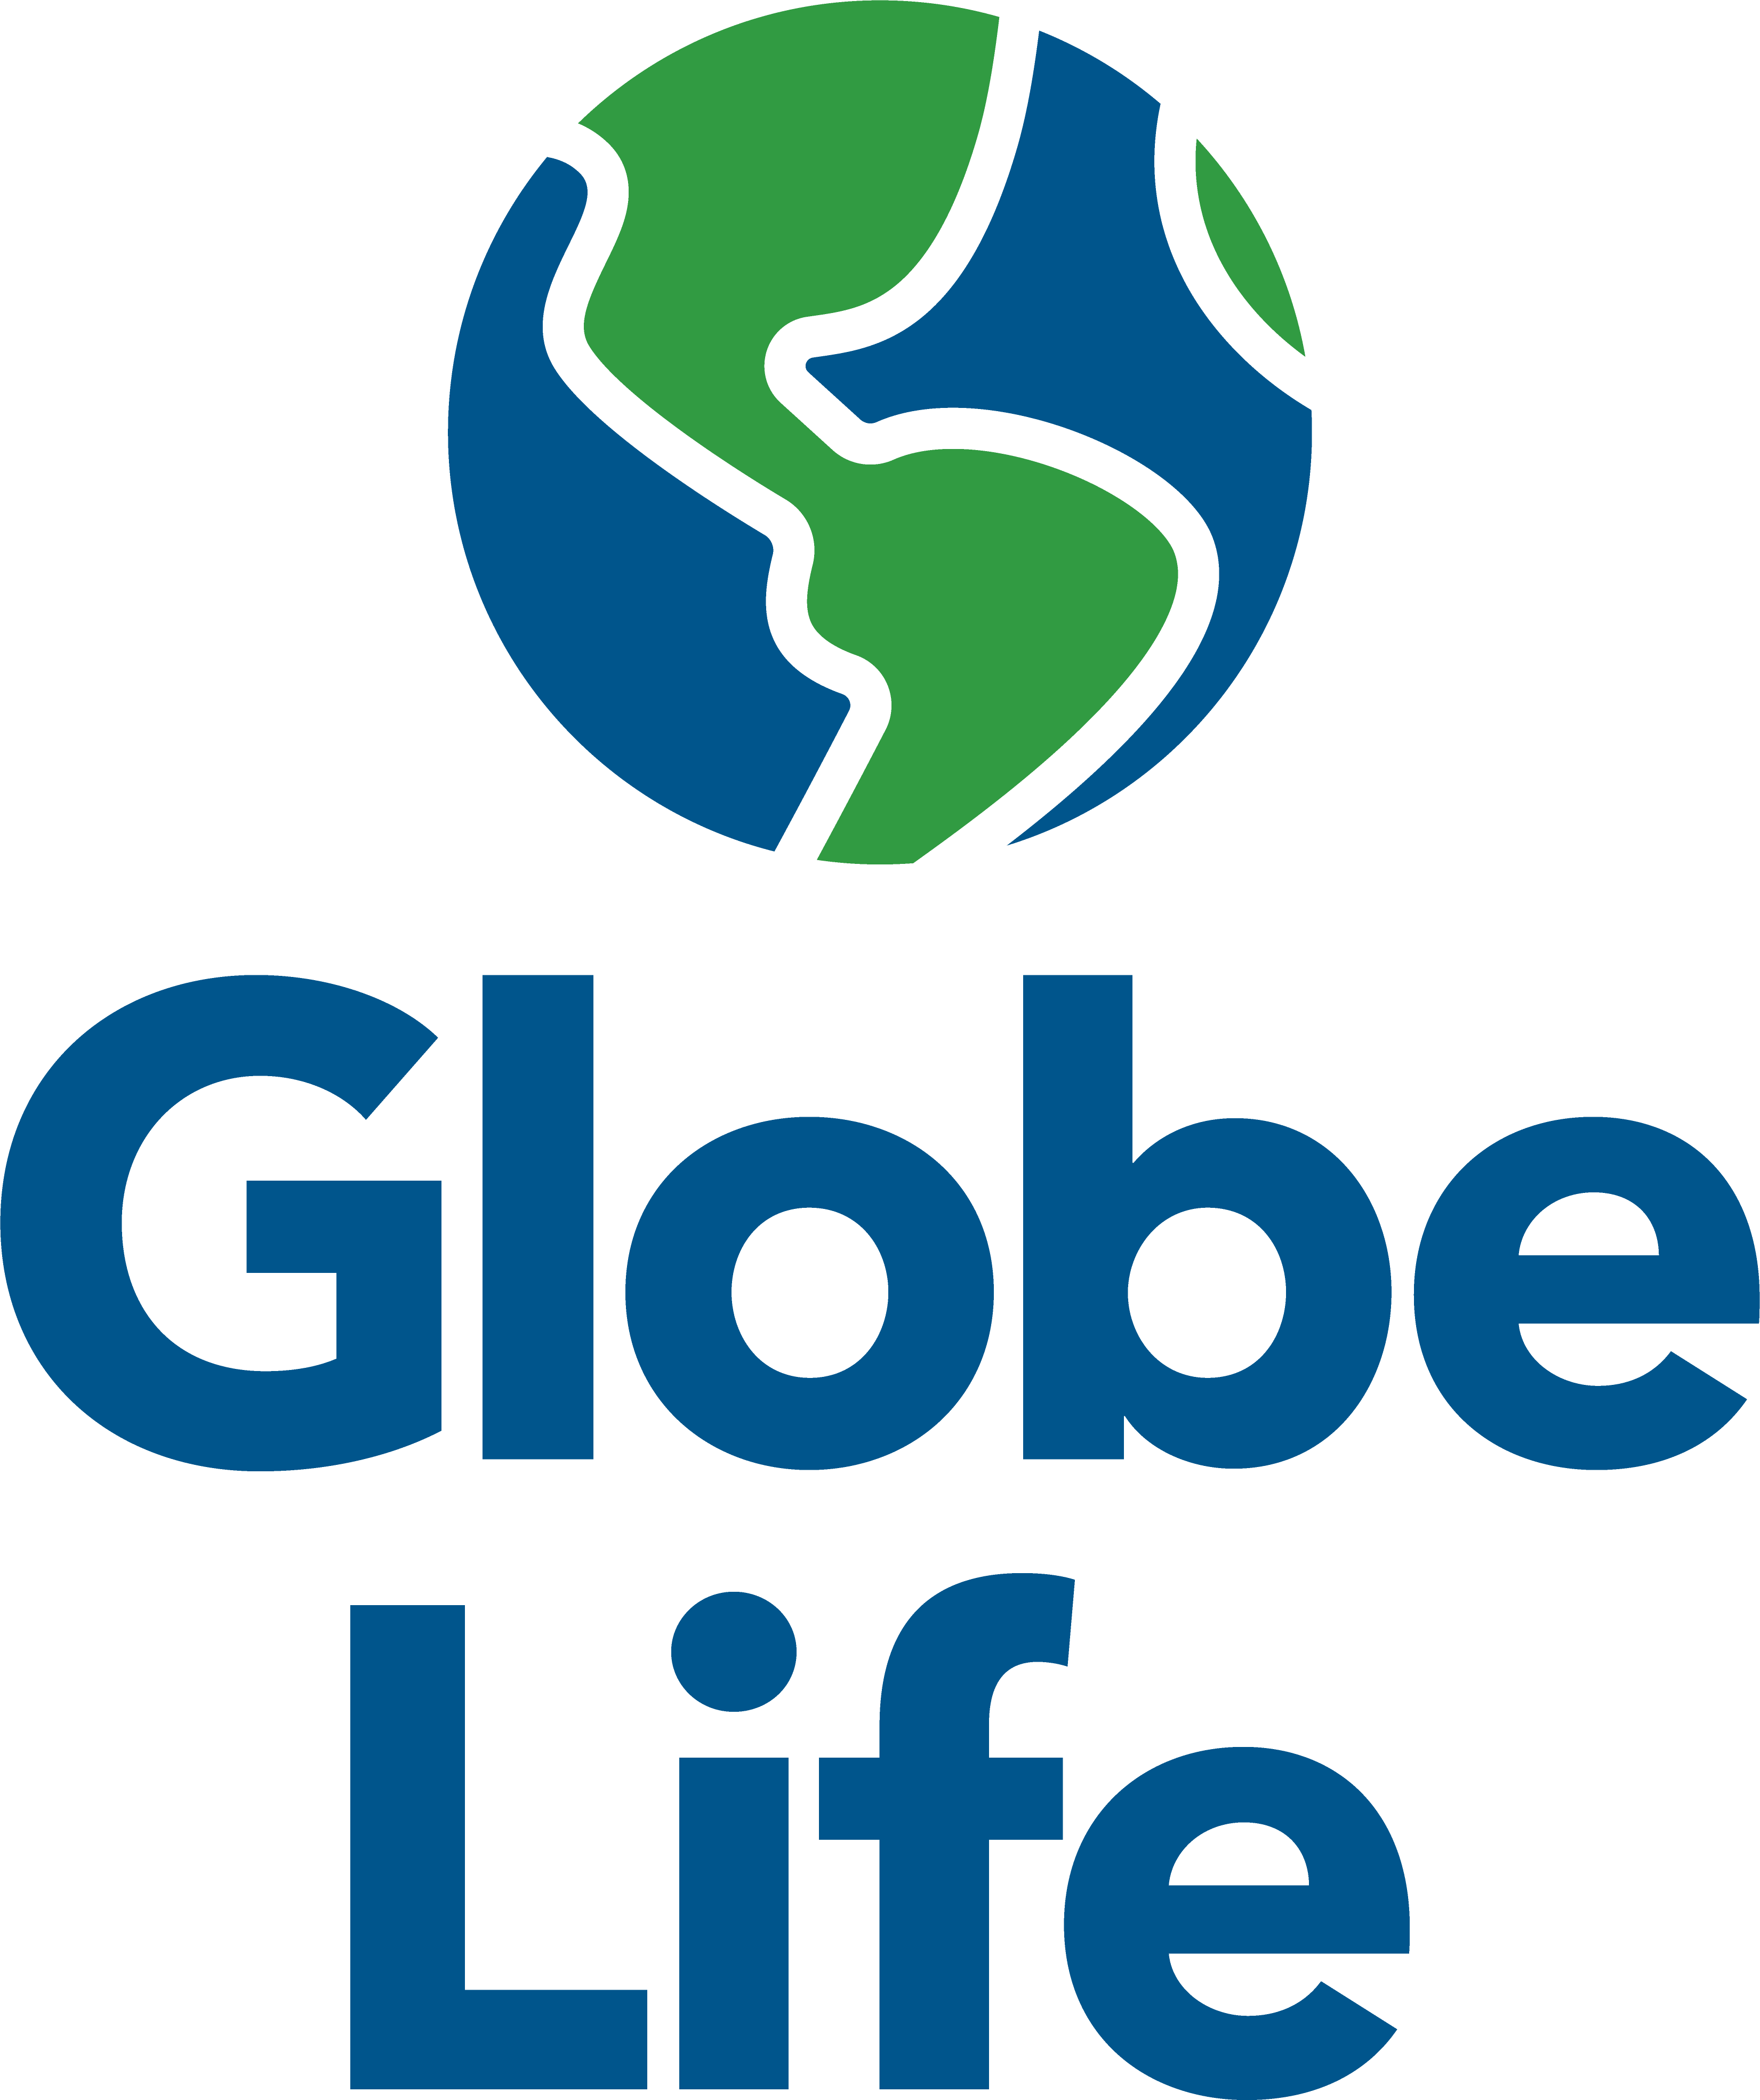 Globe Life and Accident Insurance Company